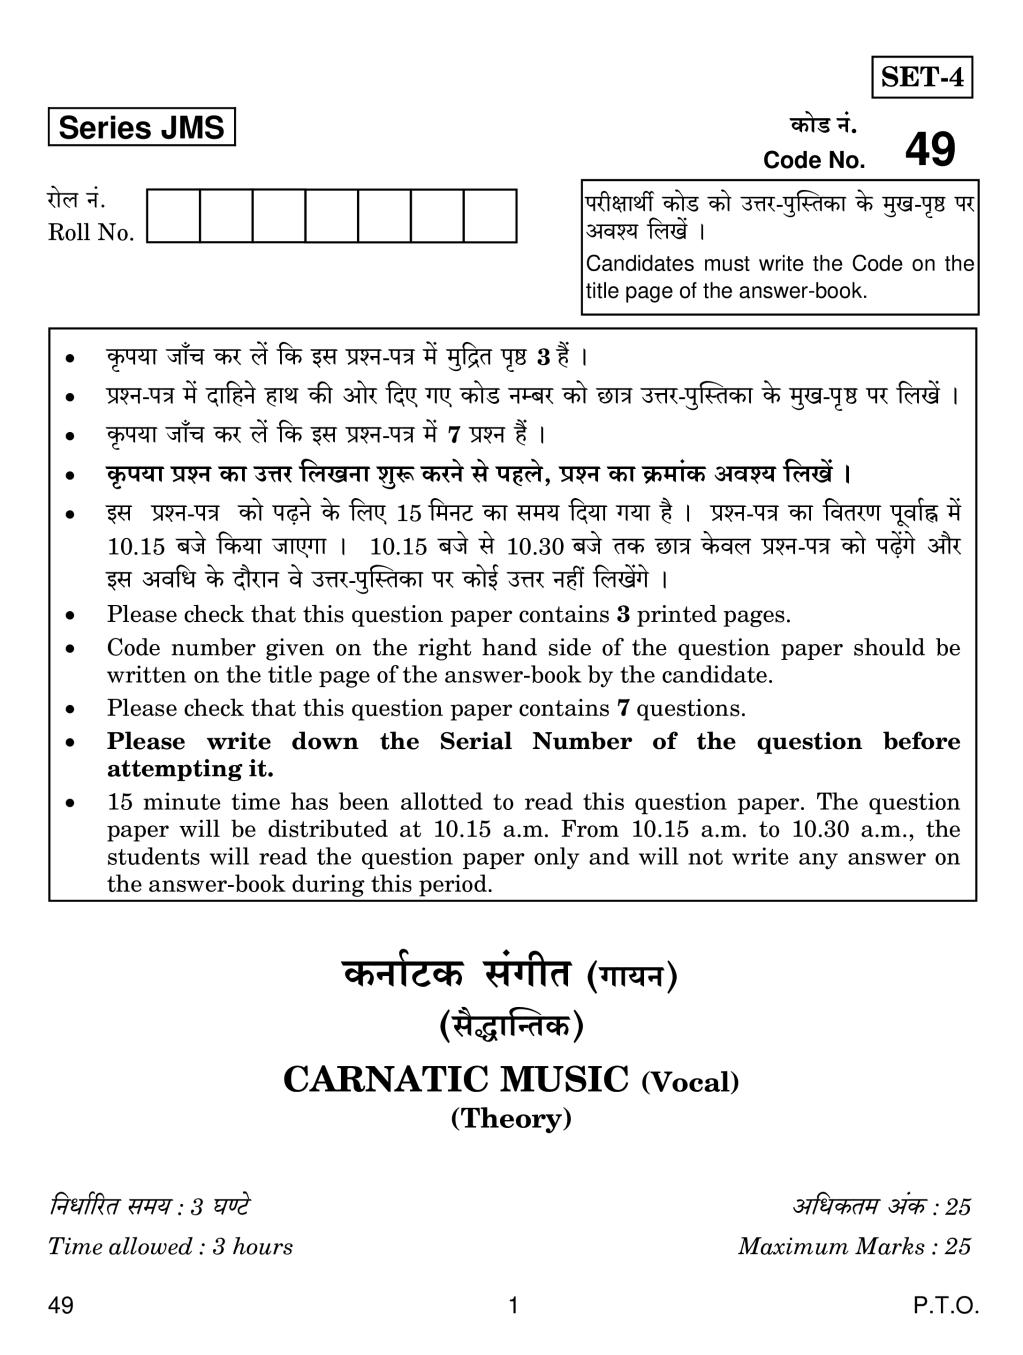 CBSE Class 10 Carnatic Music (Vocal) Question Paper 2019 - Page 1